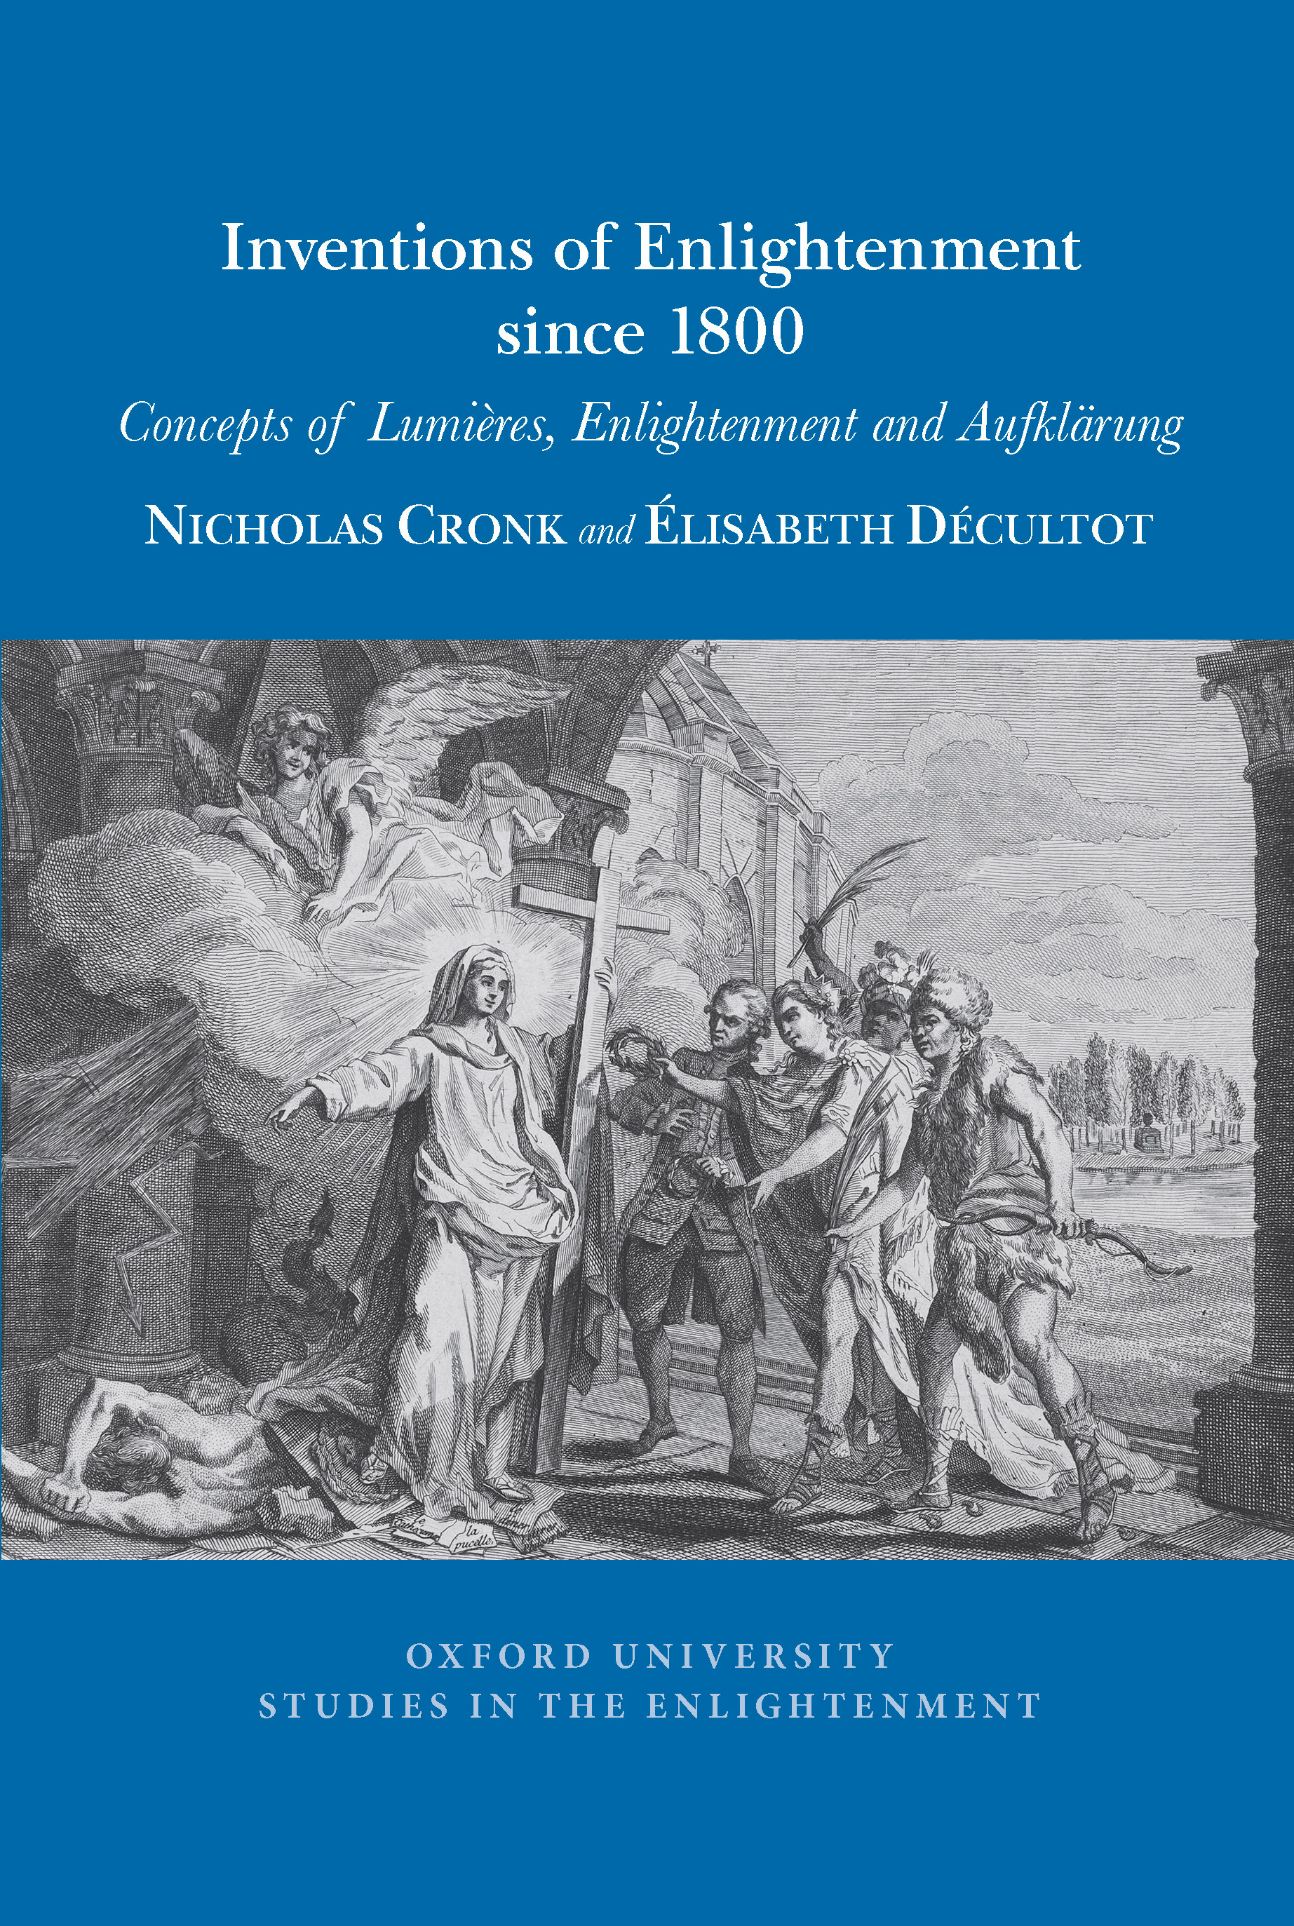 N. Cronk and E. Décultot, Inventions of Enlightenment Since 1800. Concepts of Lumières, Enlightenment and Aufklärung 